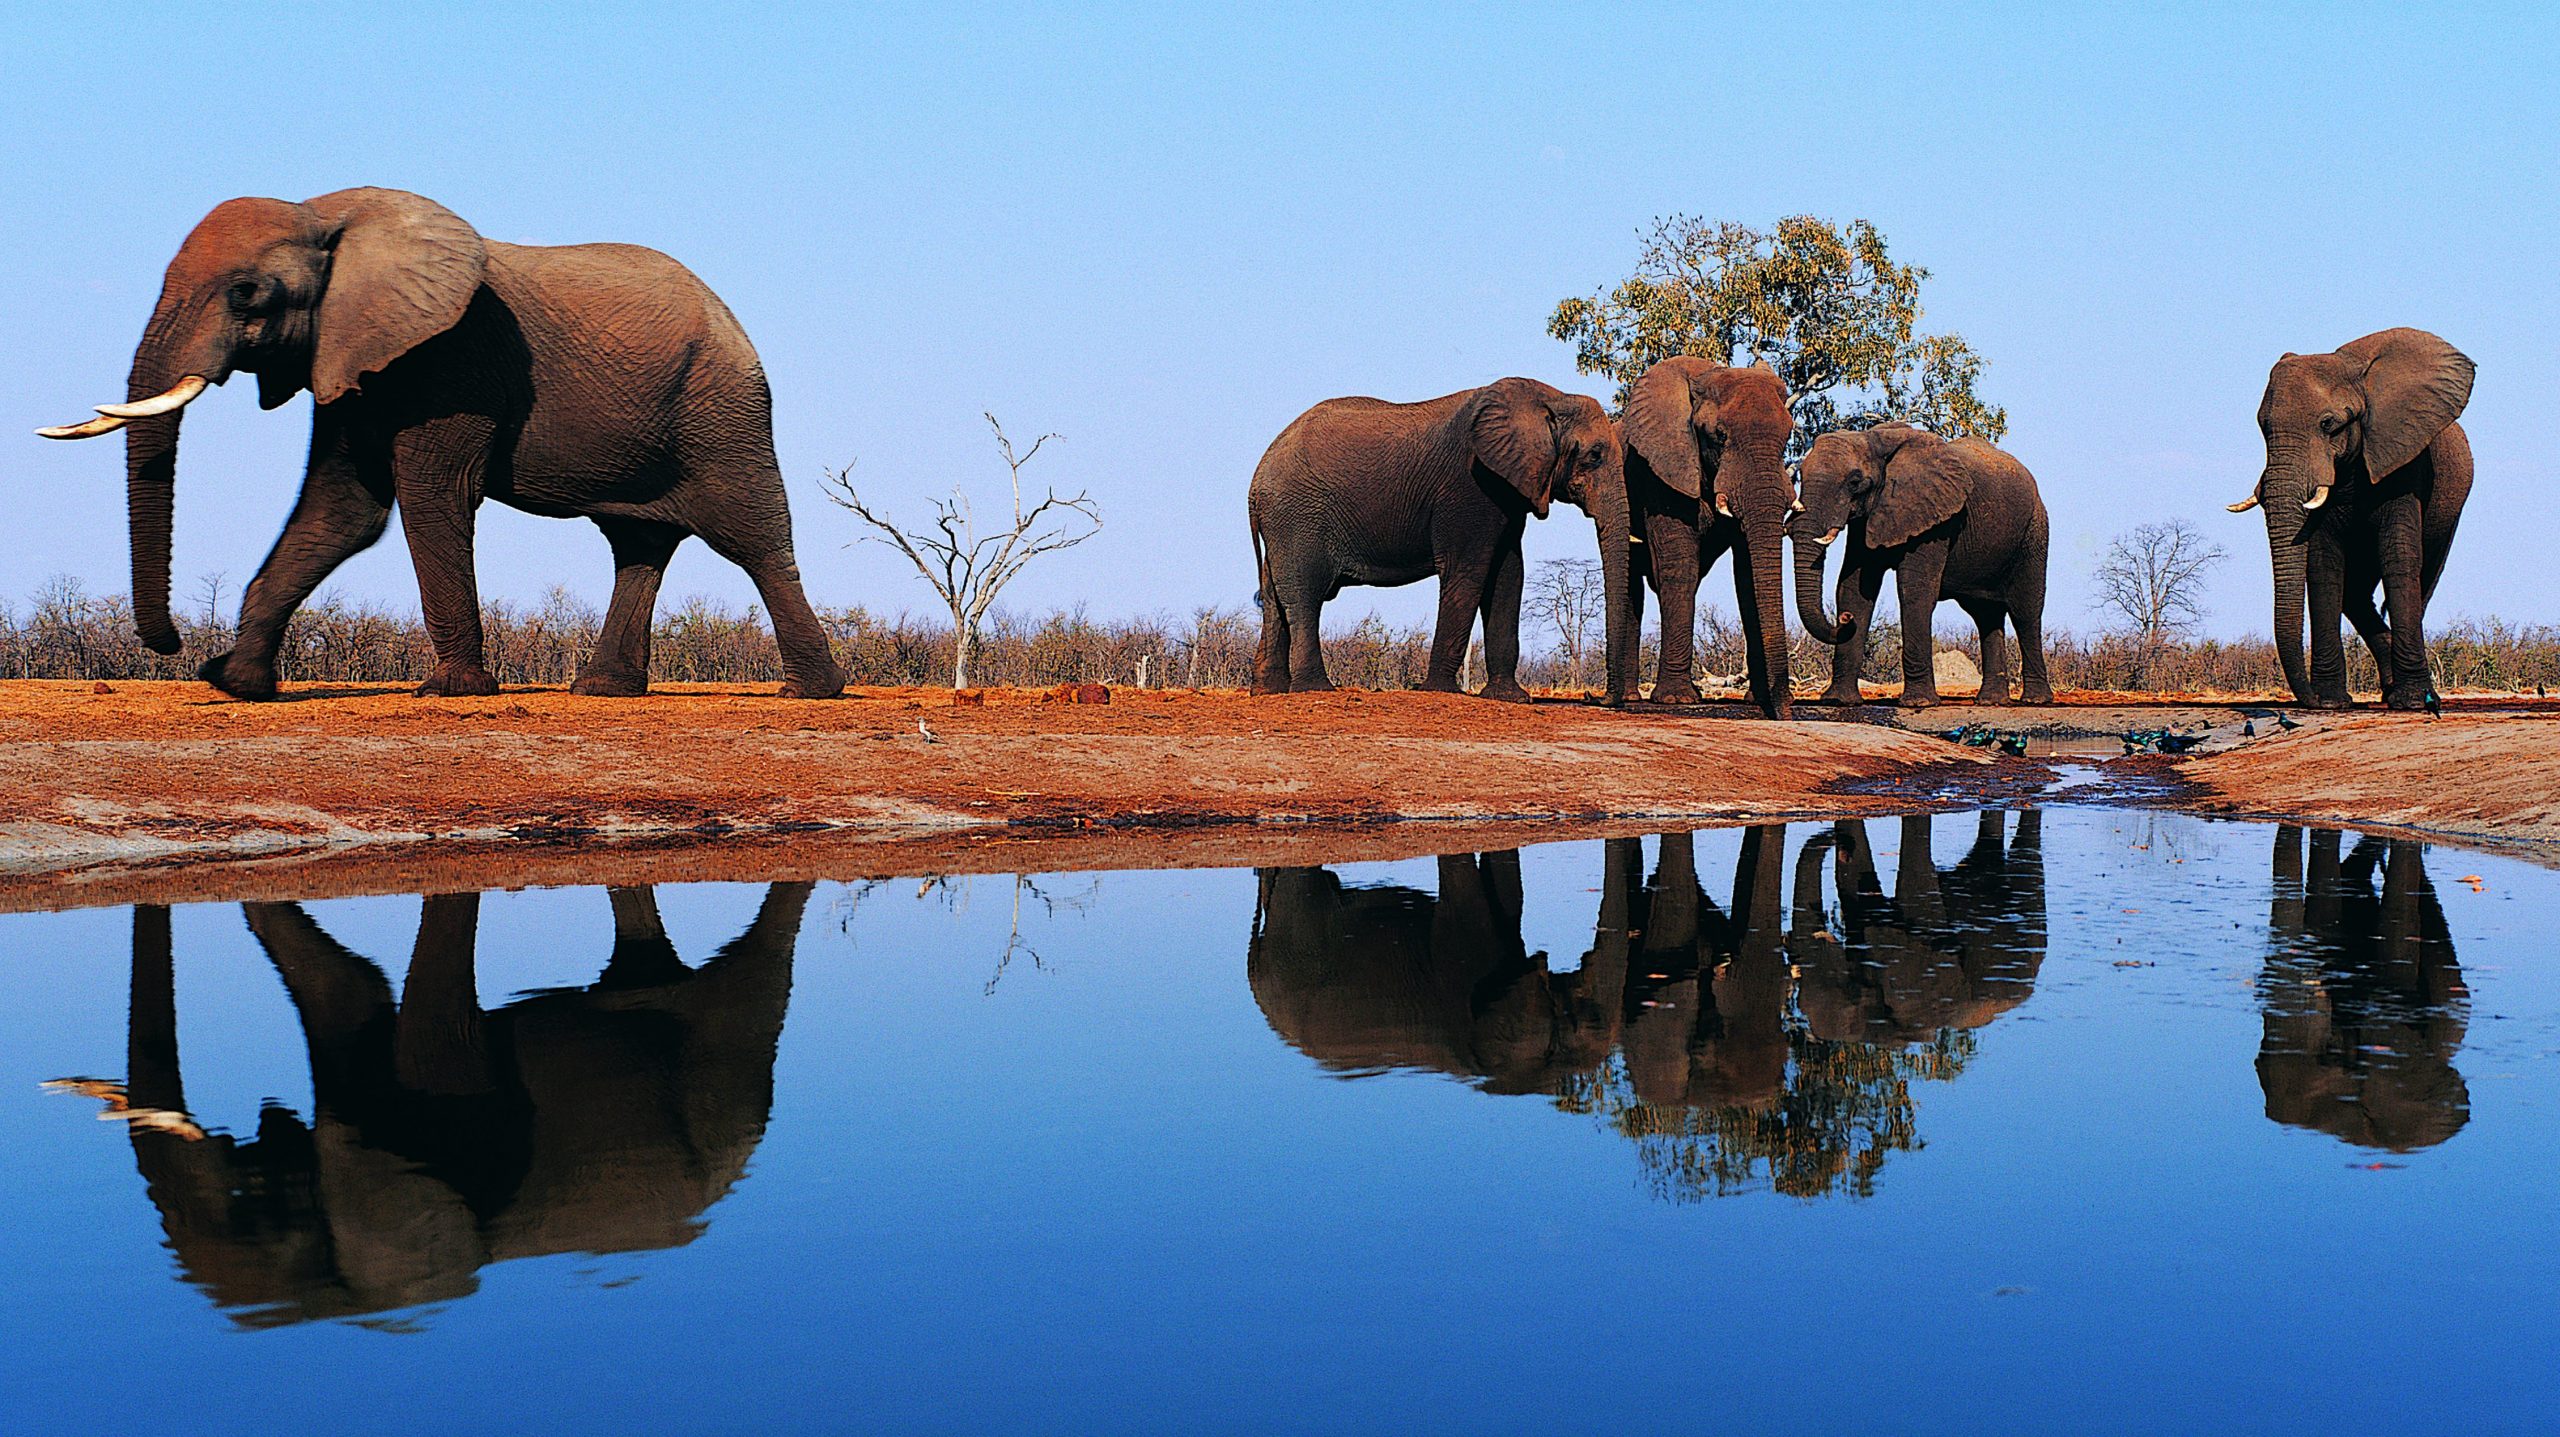 A herd of elephants is reflected in the water of a blue pool beneath a clear blue sky